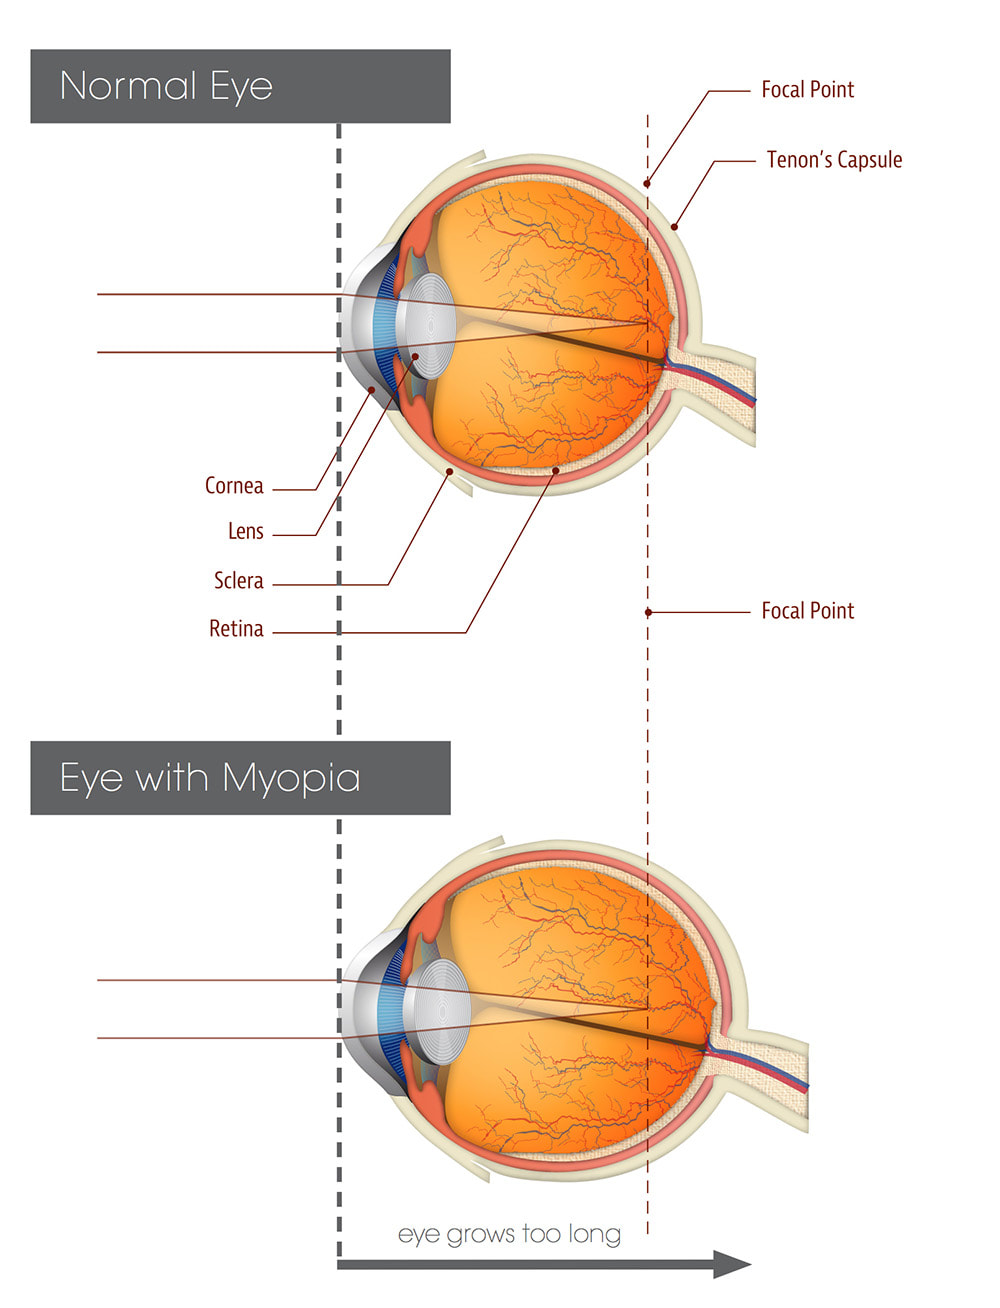 Normal eye compared to an elongated myopic eye that is at higher risk of developing disease.